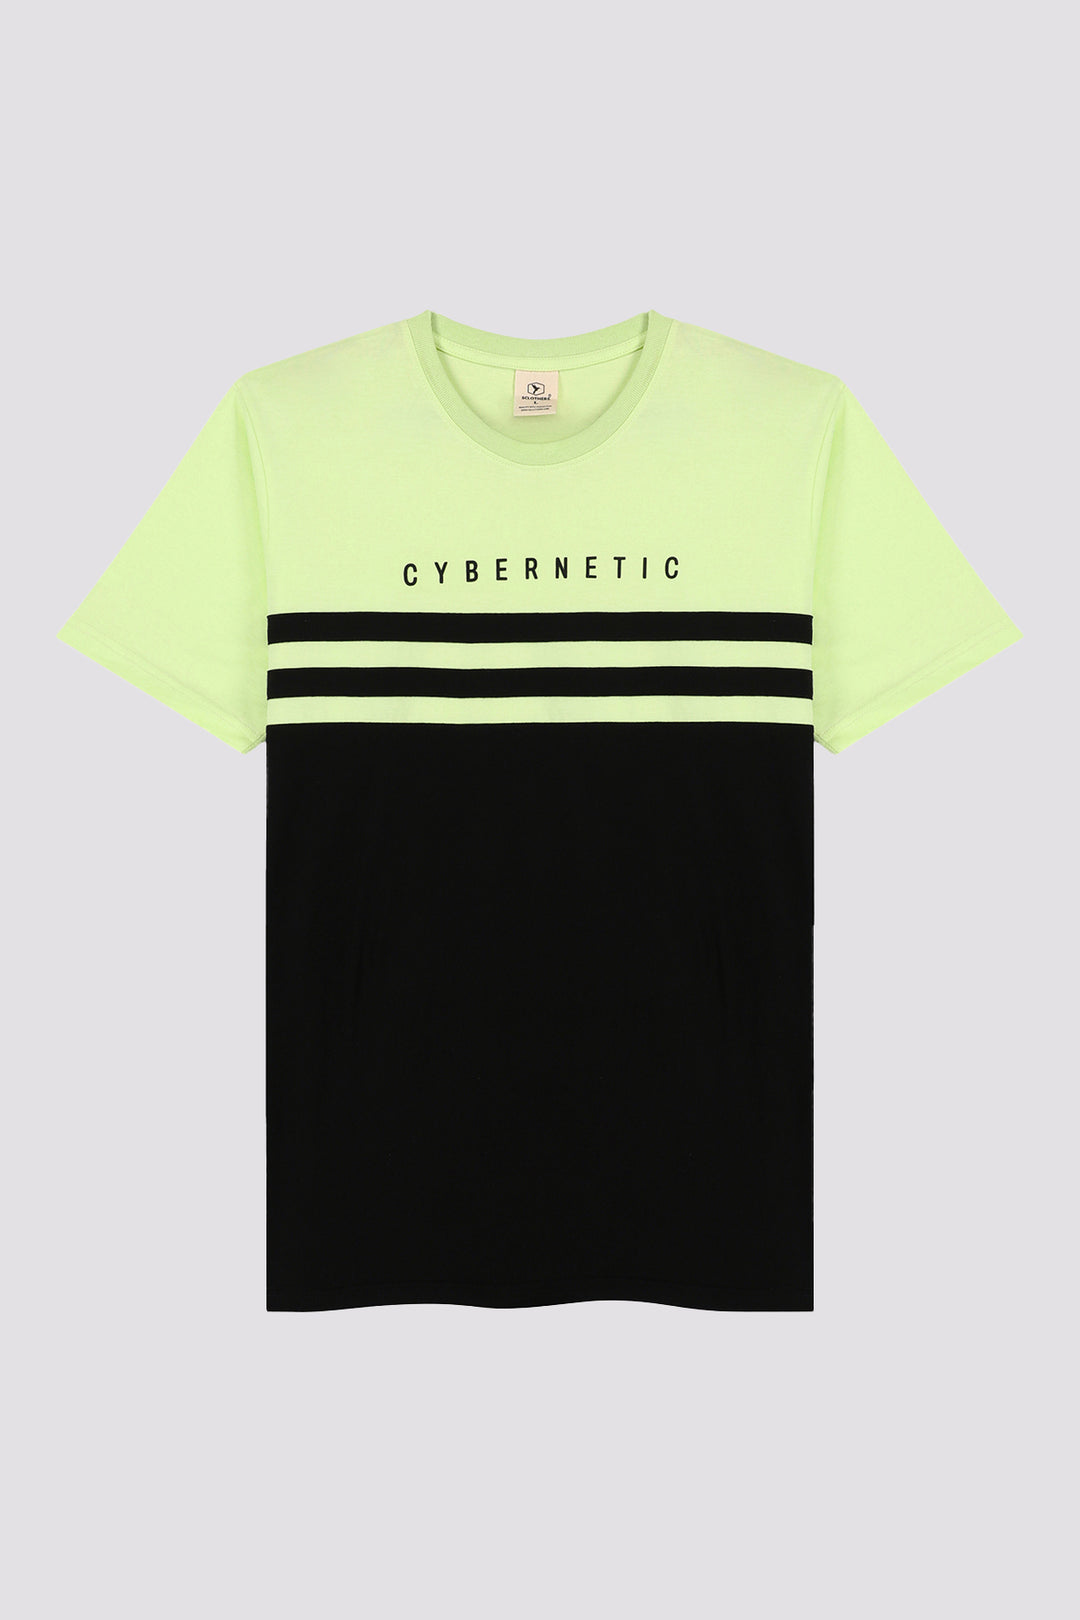 Cybernetic Lime Green & Black Graphic T-Shirt - A24 - MT0323R